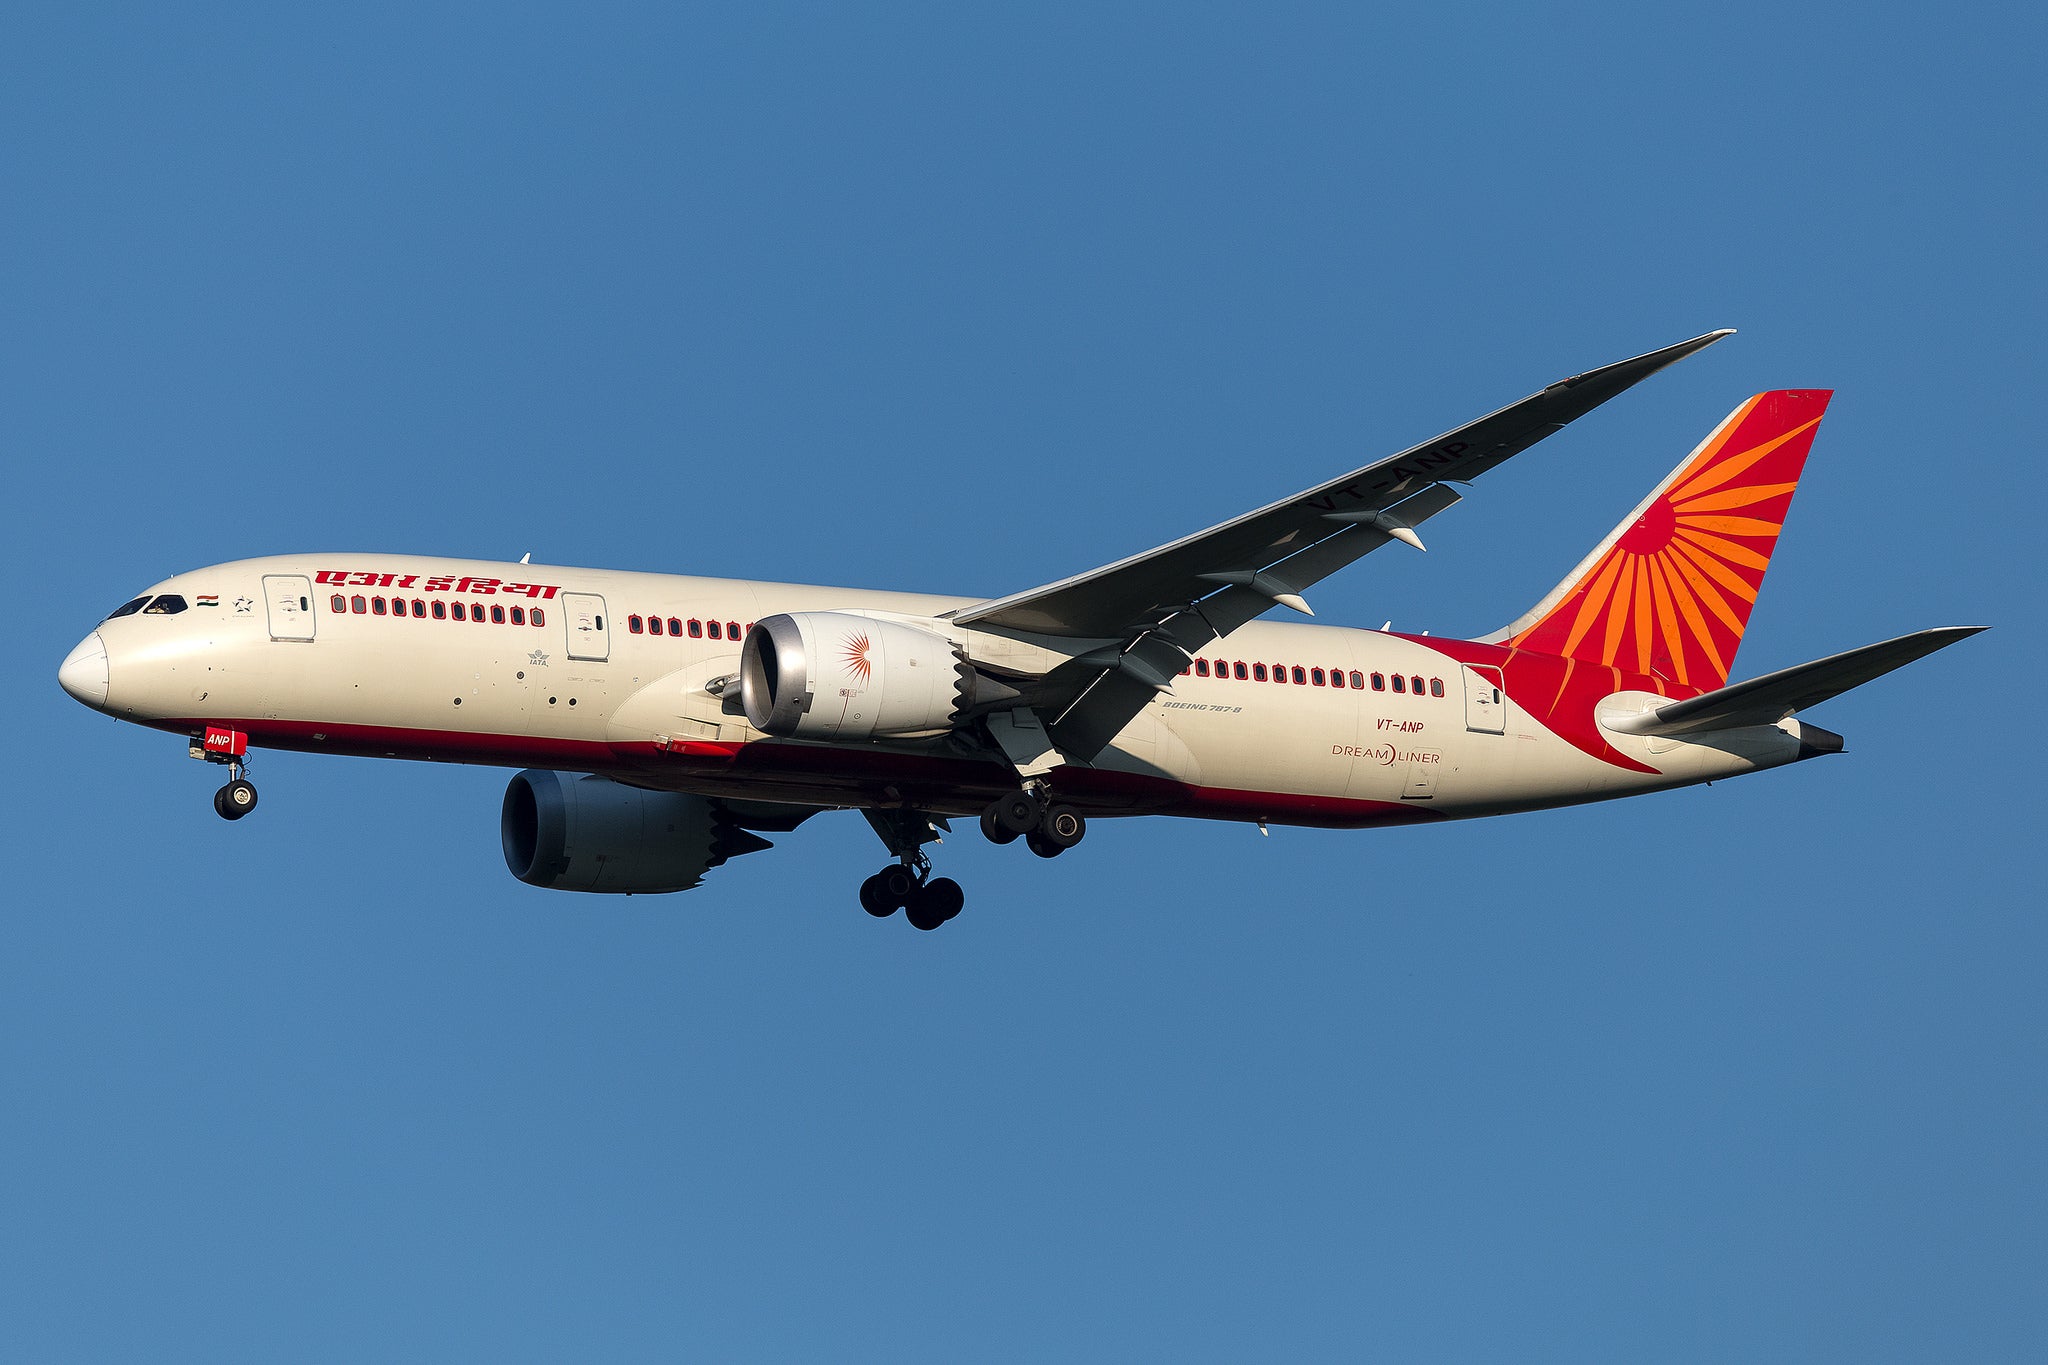 air-india-787-800. Image by Bruno Geiger / Flickr.